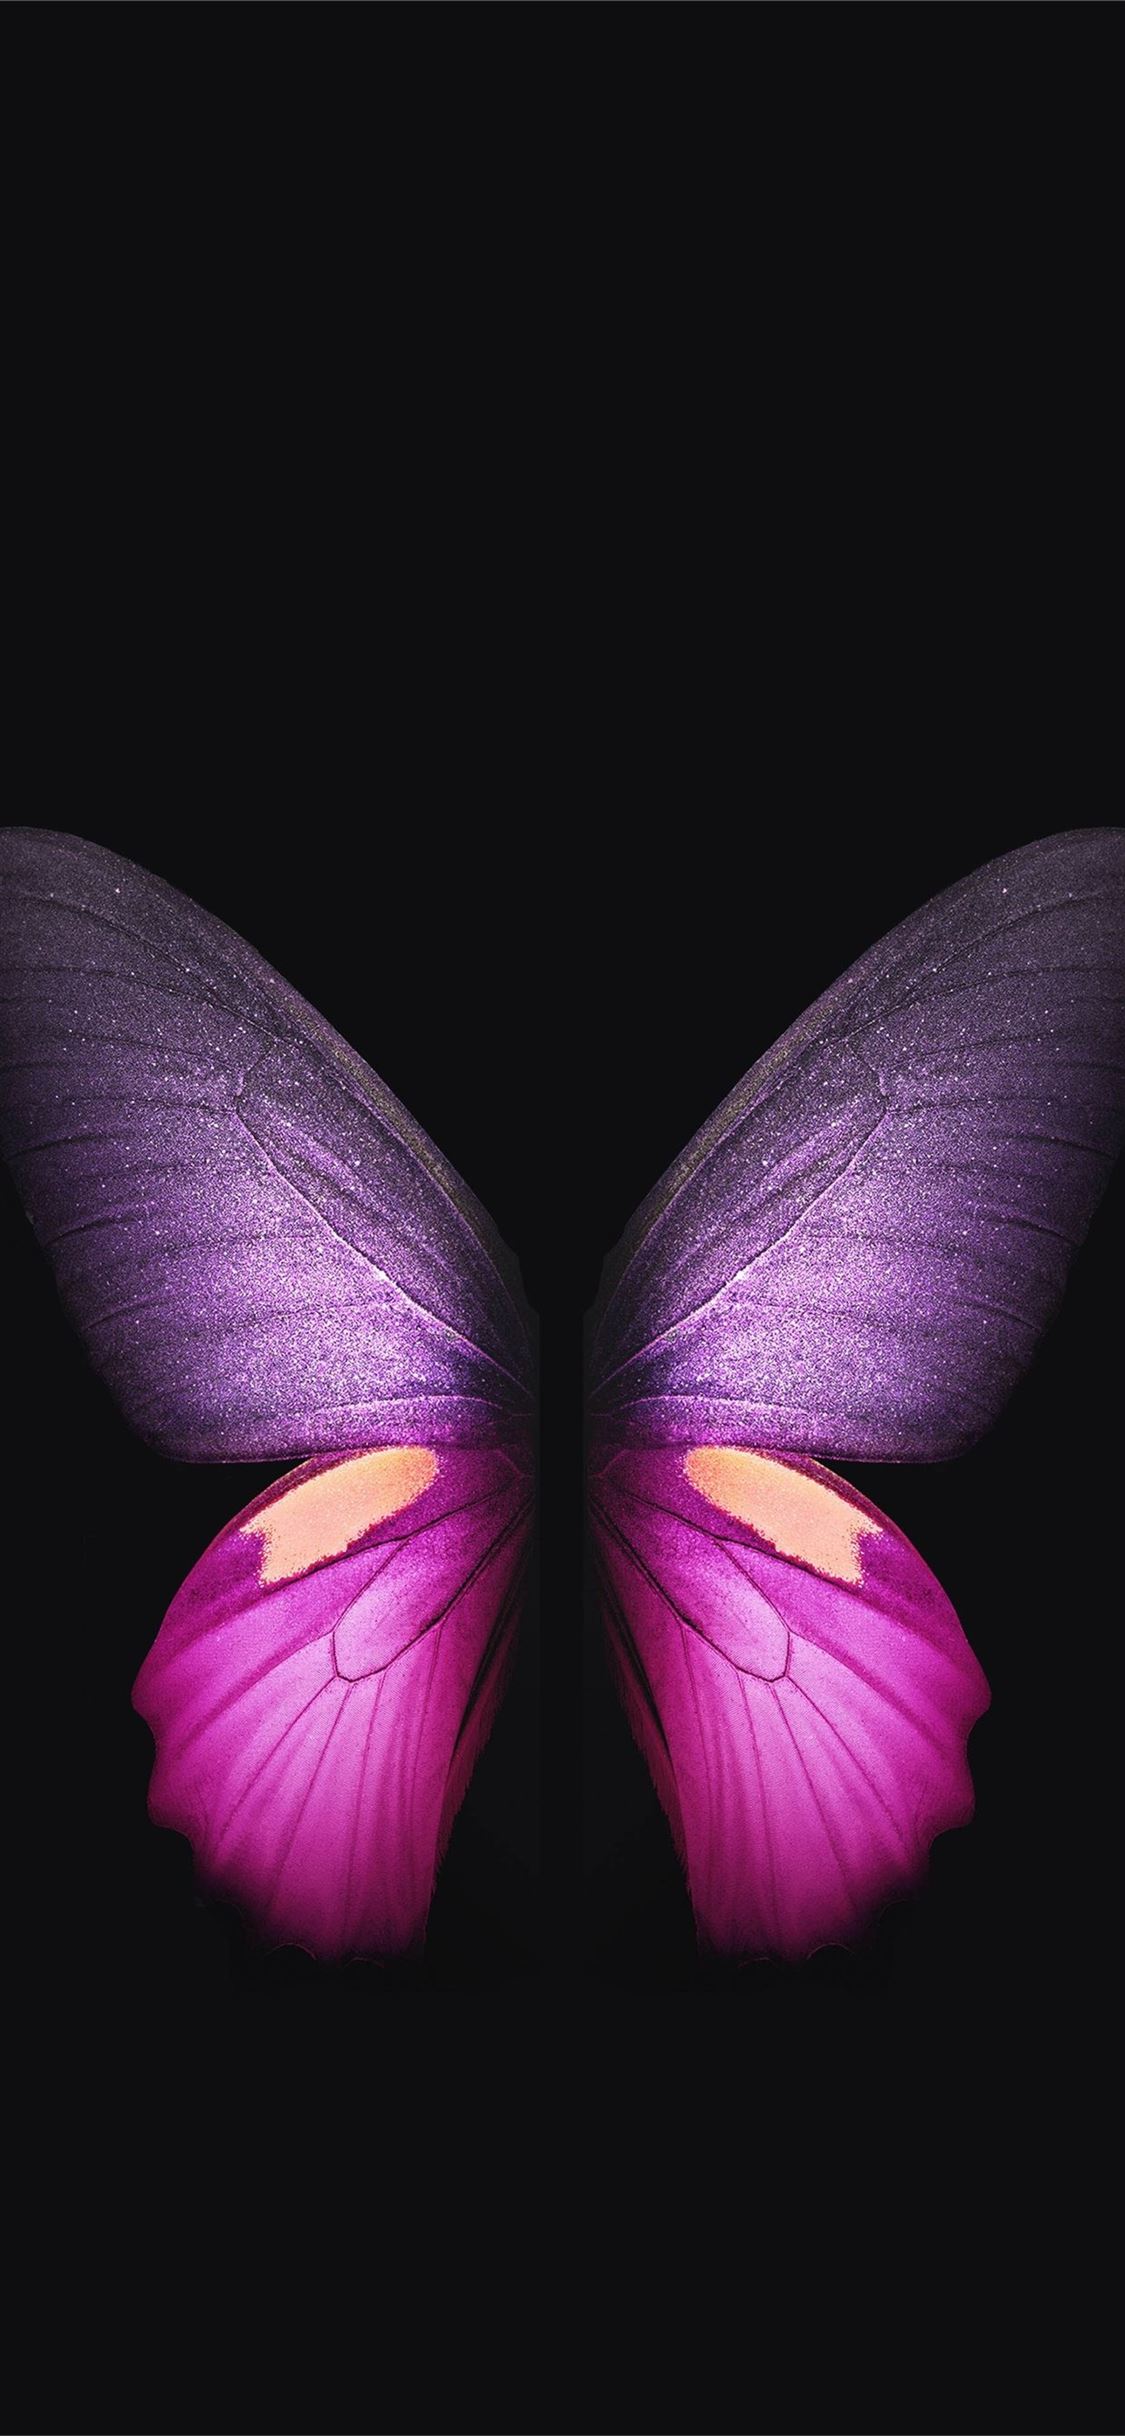 Samsung Galaxy Fold QHD Official iPhone 11 Wallpapers Free Download